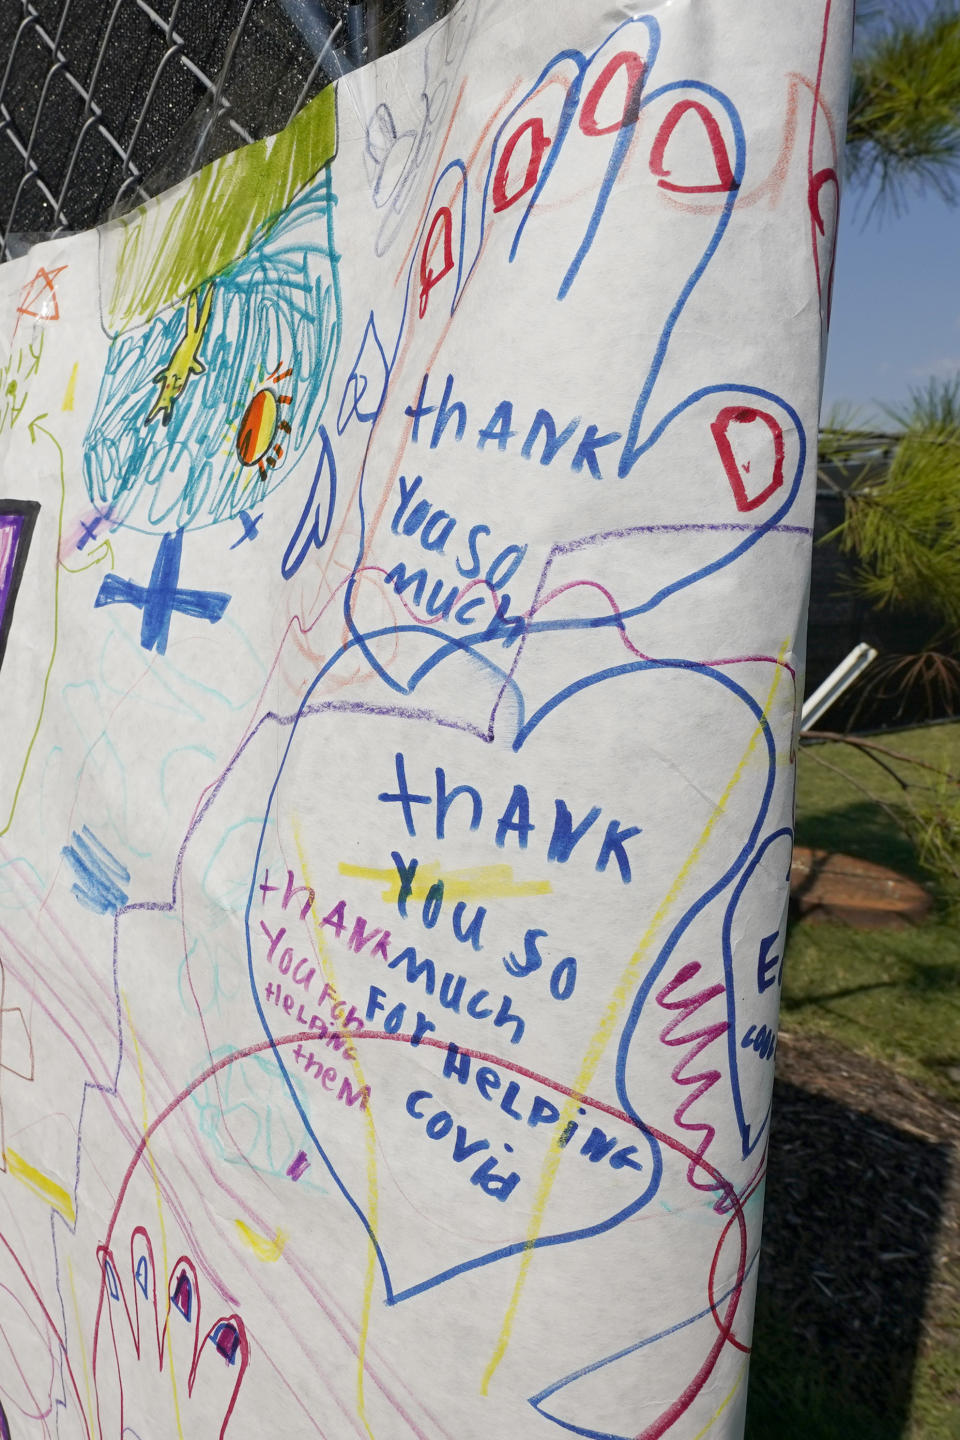 An oversized poster, drawn by the school children of an area Christian school thanking the medical workers with both Samaritan's Purse Missions and the University of Mississippi Medical Center, decorates the entrance leading to a field hospital based in a covered parking lot at the medical facility, in Jackson, Miss., Wednesday, Aug. 25, 2021. (AP Photo/Rogelio V. Solis)